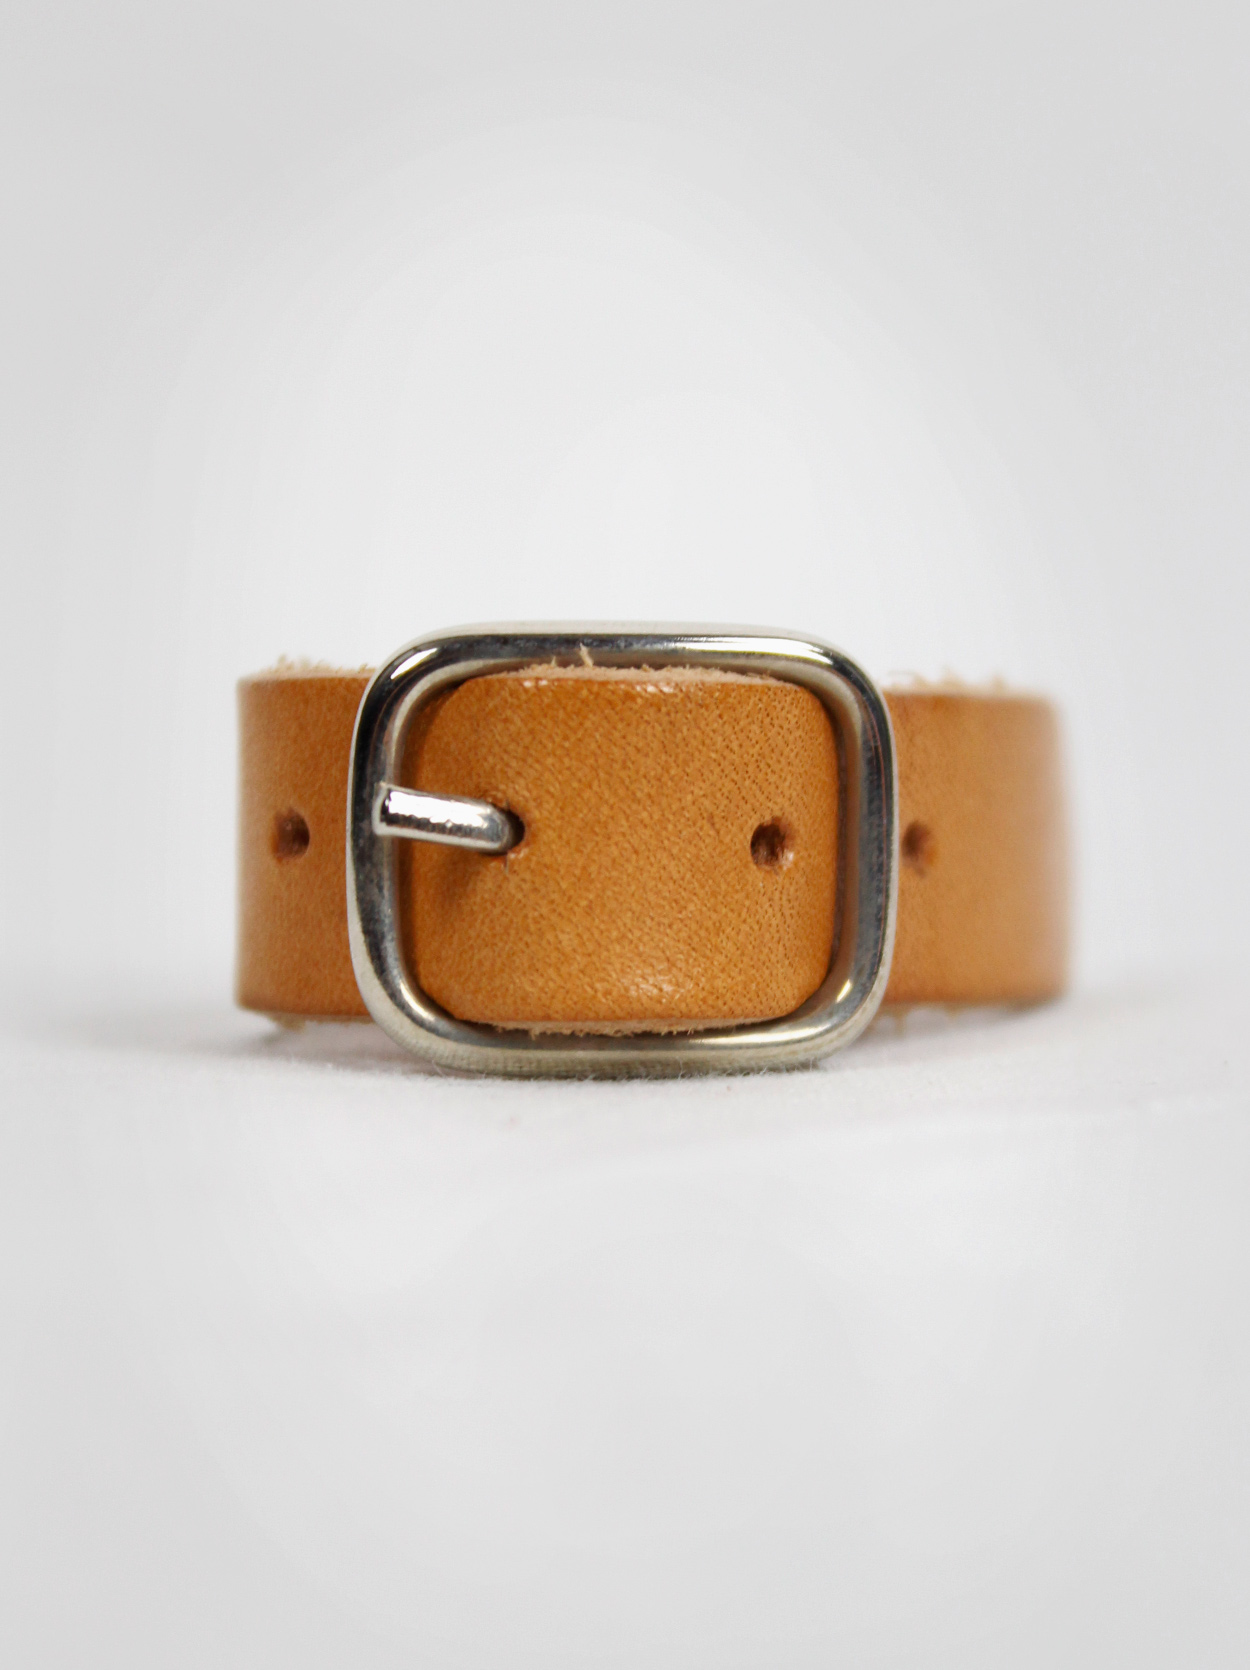 Maison Martin Margiela ring made of a brown leather belt with silver buckle  — 1990's - V A N II T A S